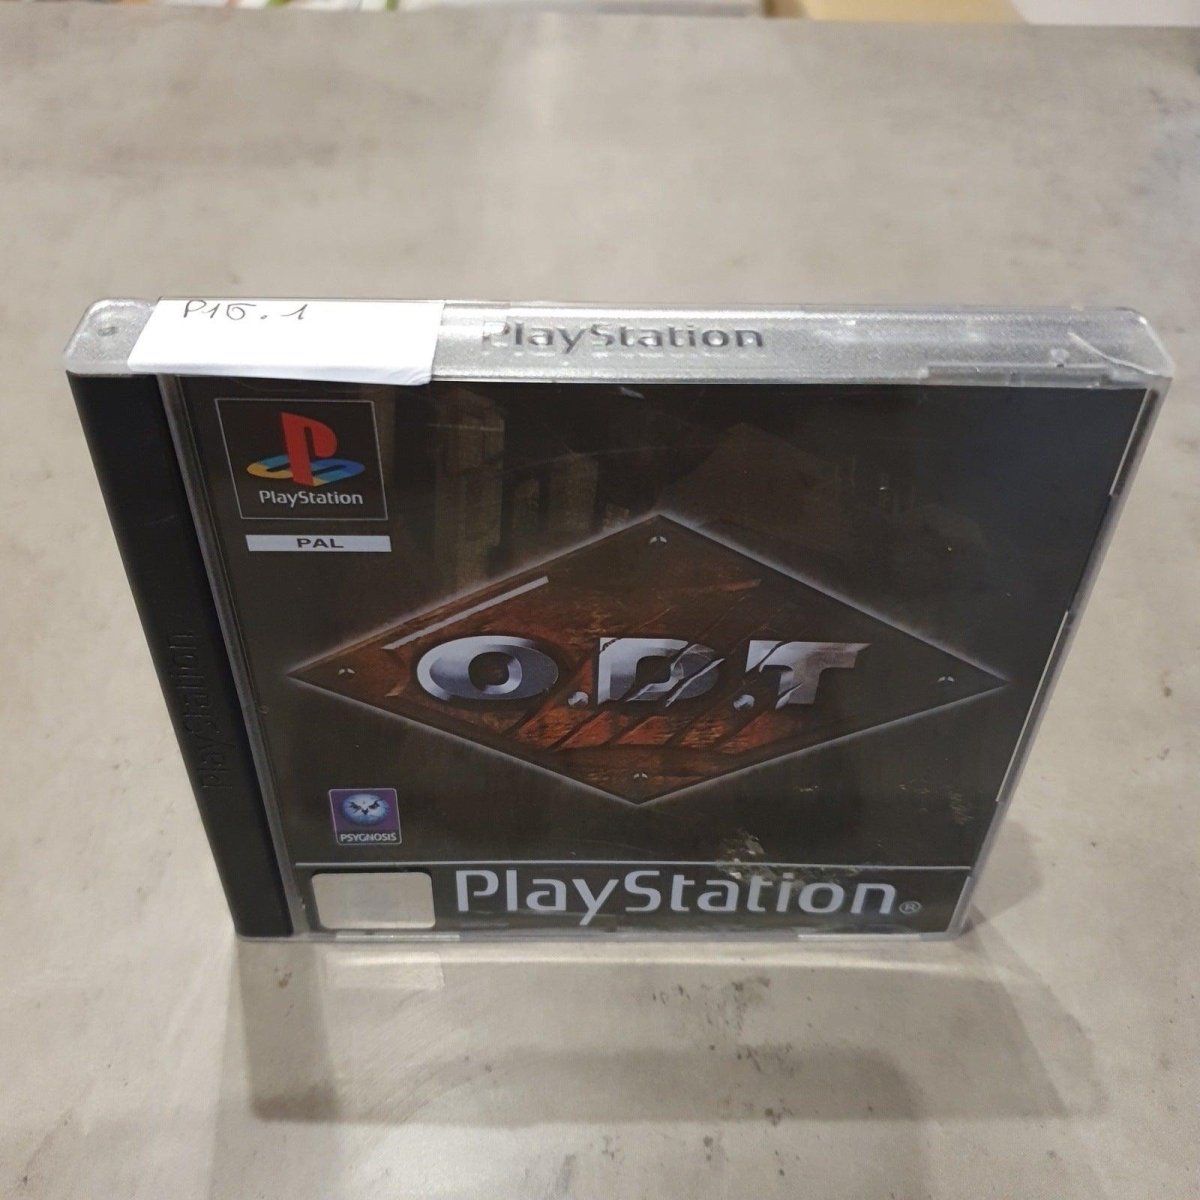 O.D.T game Sony Playstation 1 (PS1) - Veilingcoach.be